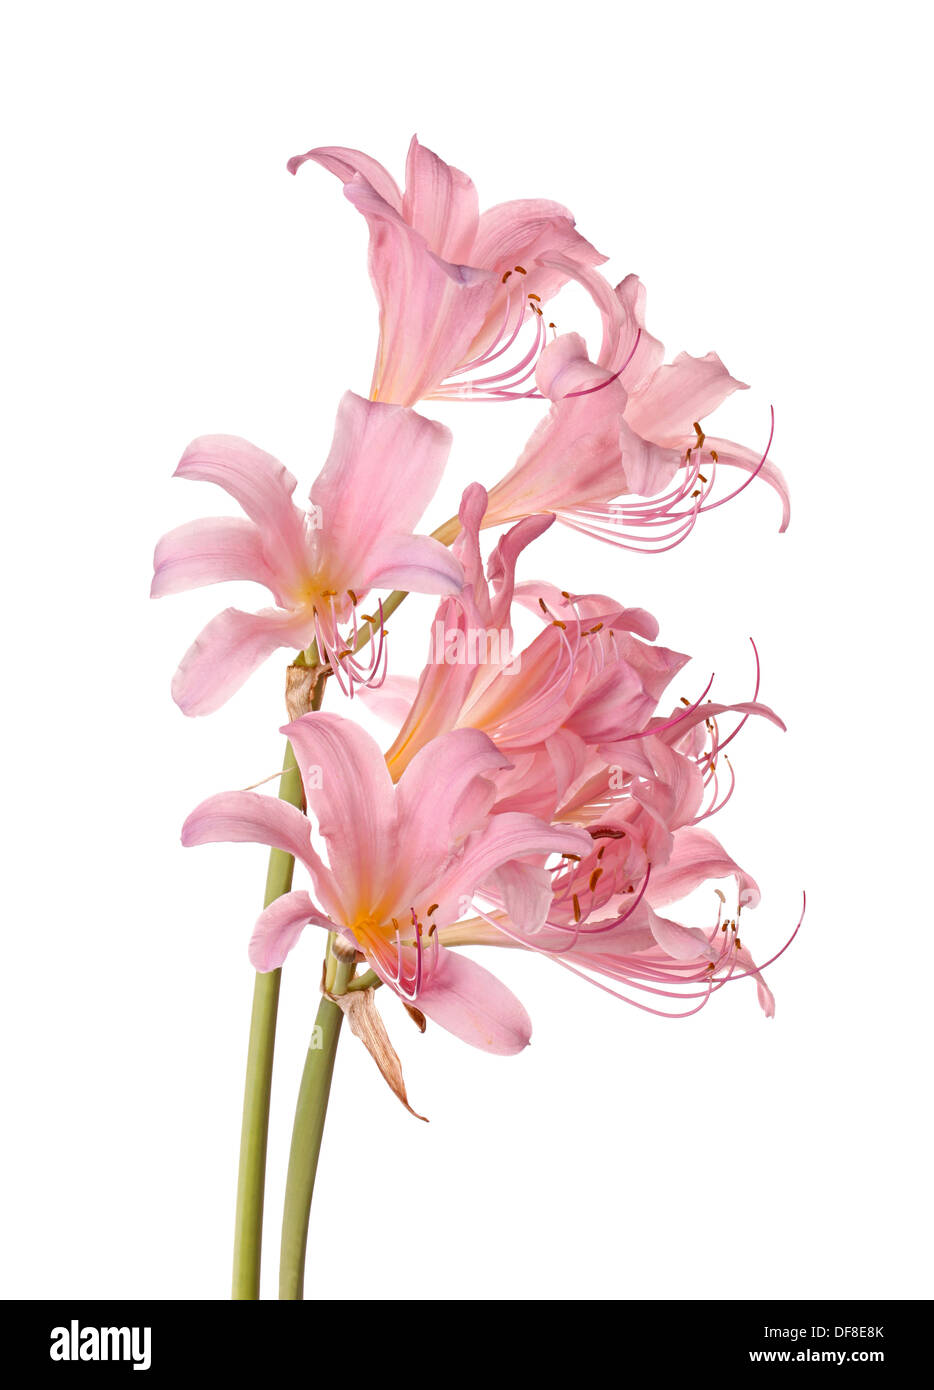 Pink flowers of Lycoris squamigera isolated against a white background Stock Photo